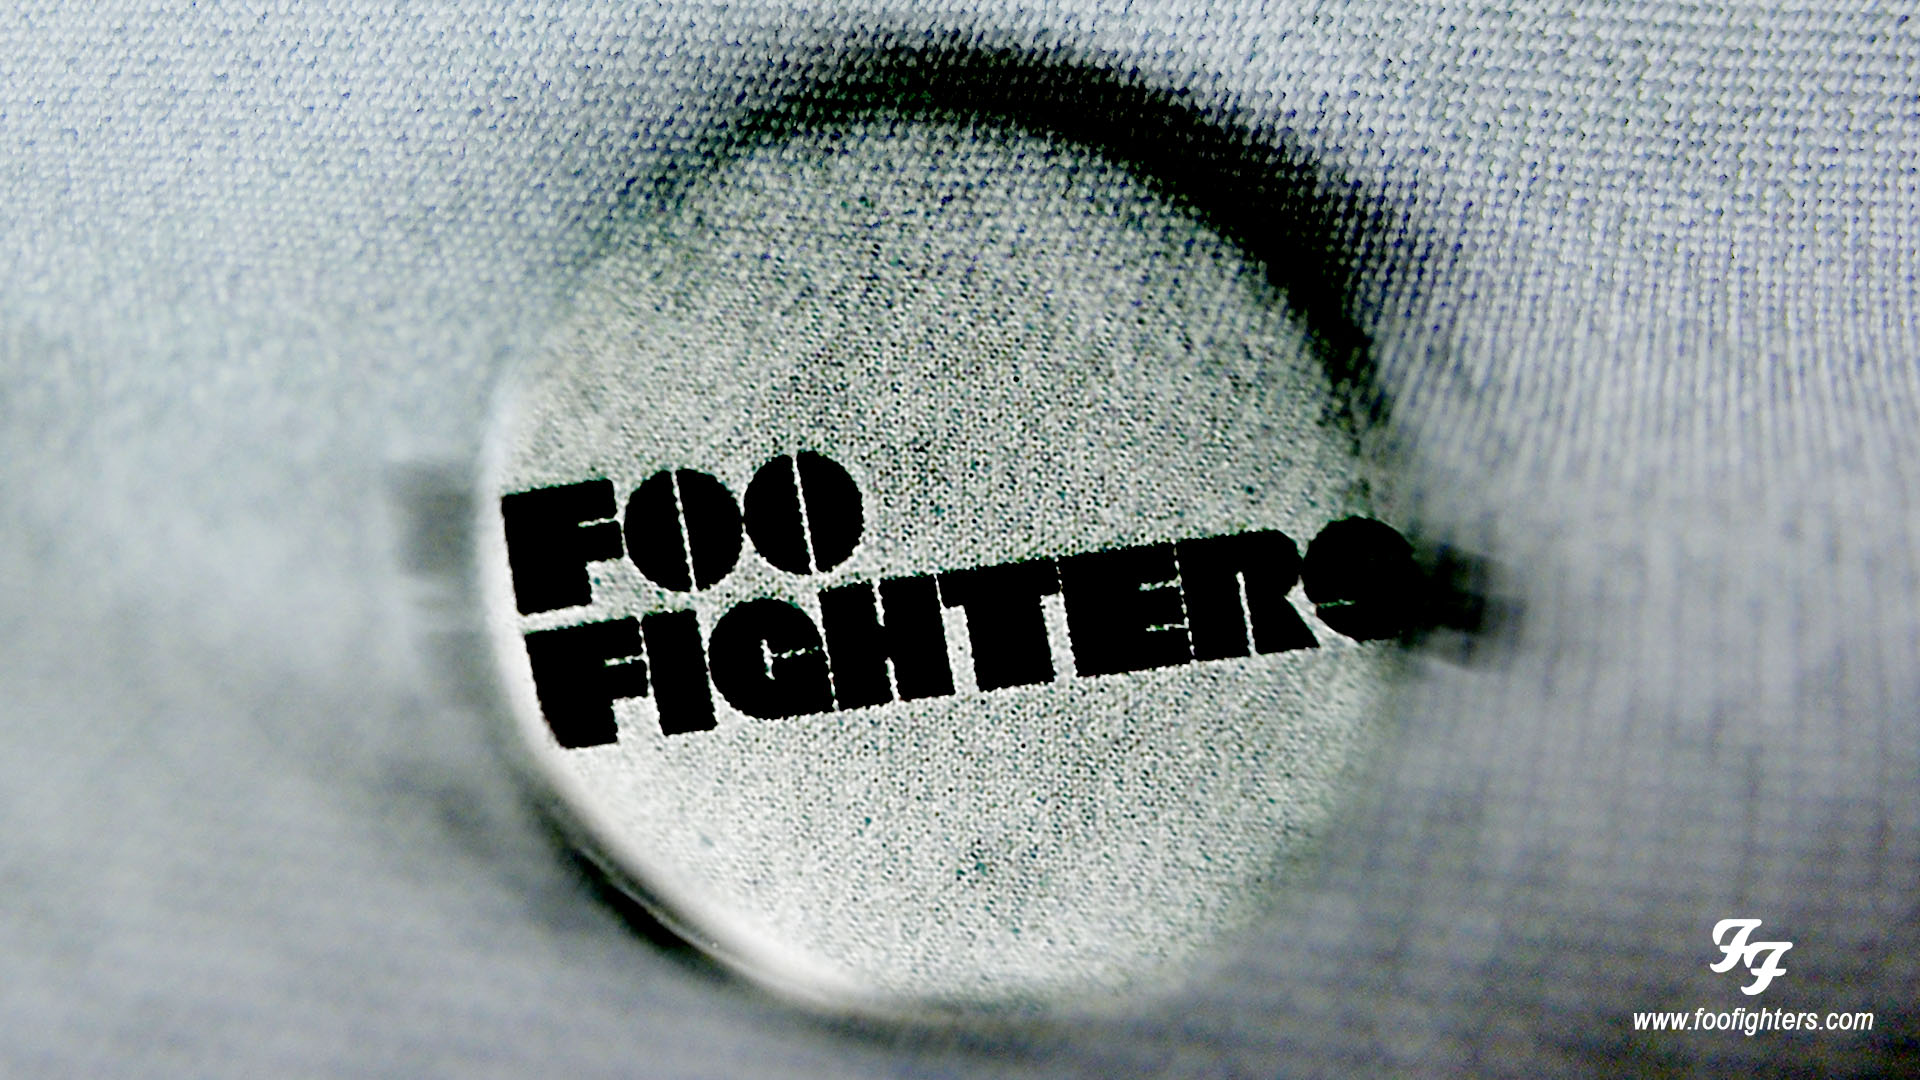 Wallpaper Foofighters Fighters Foo